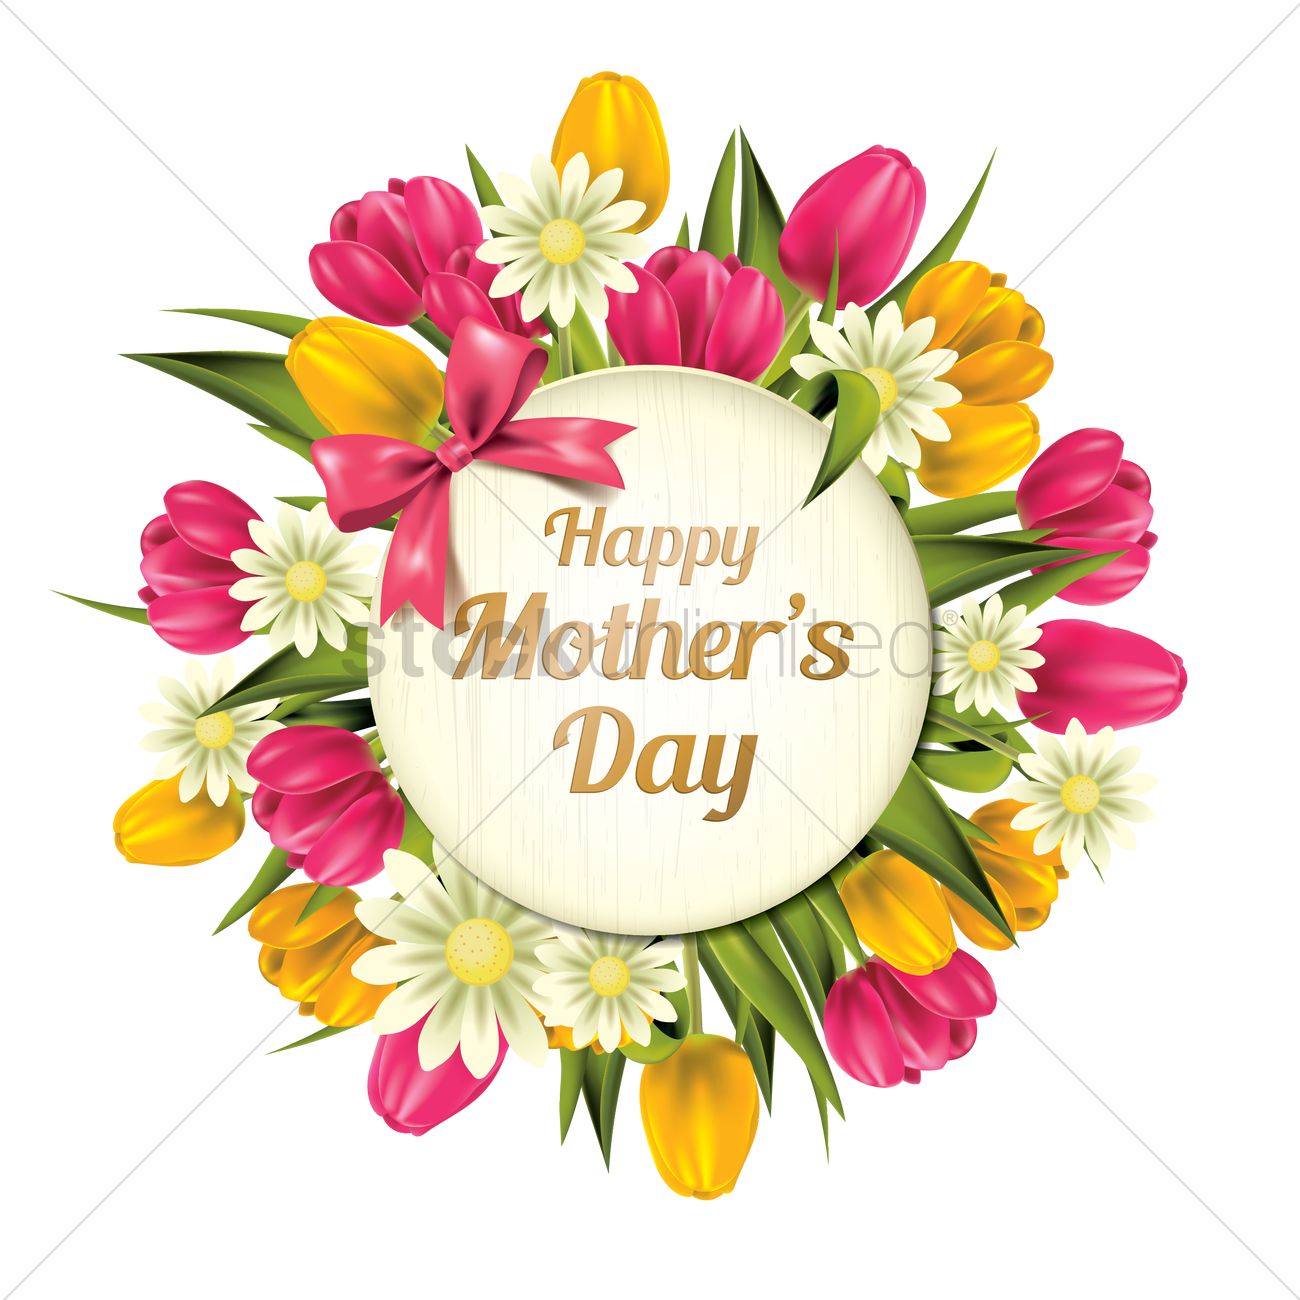 208 Happy Mothers Day free clipart.